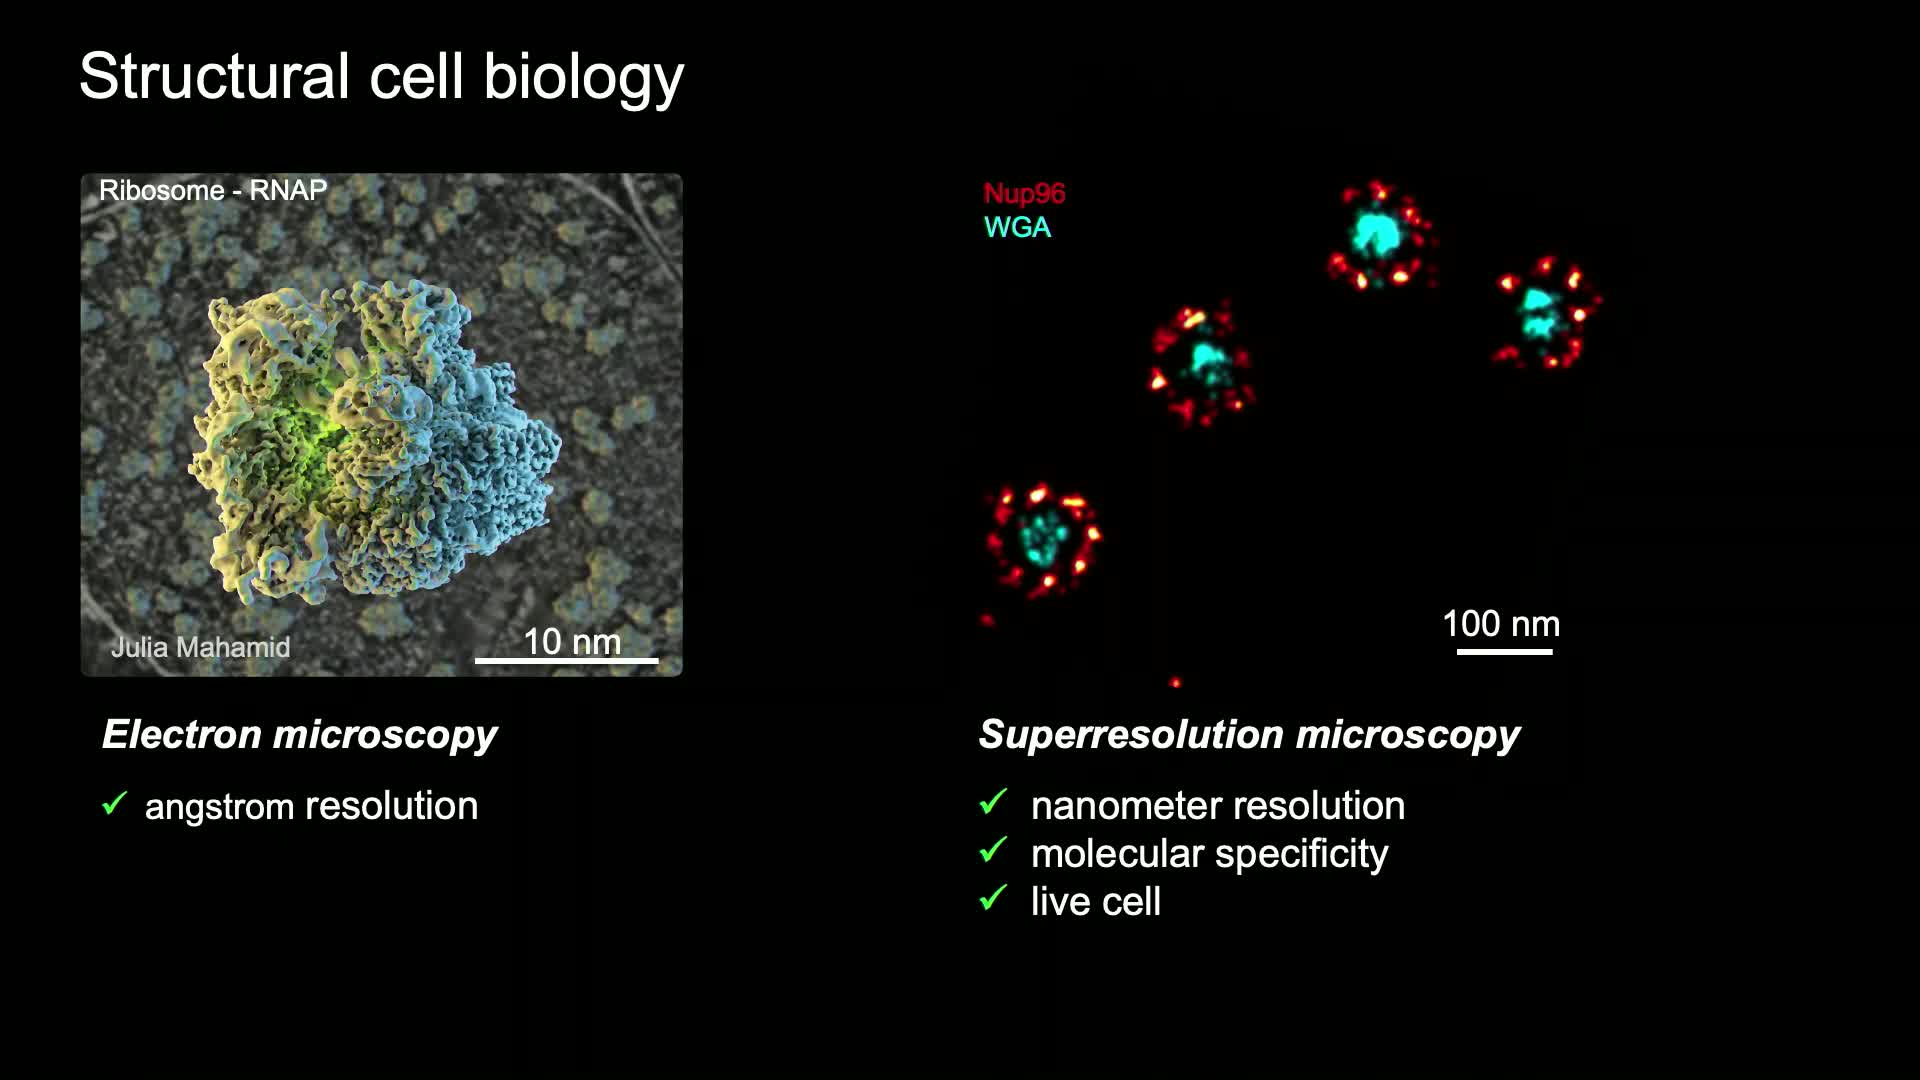 Superresolution microscopy for structural cell biology- Jonas Ries